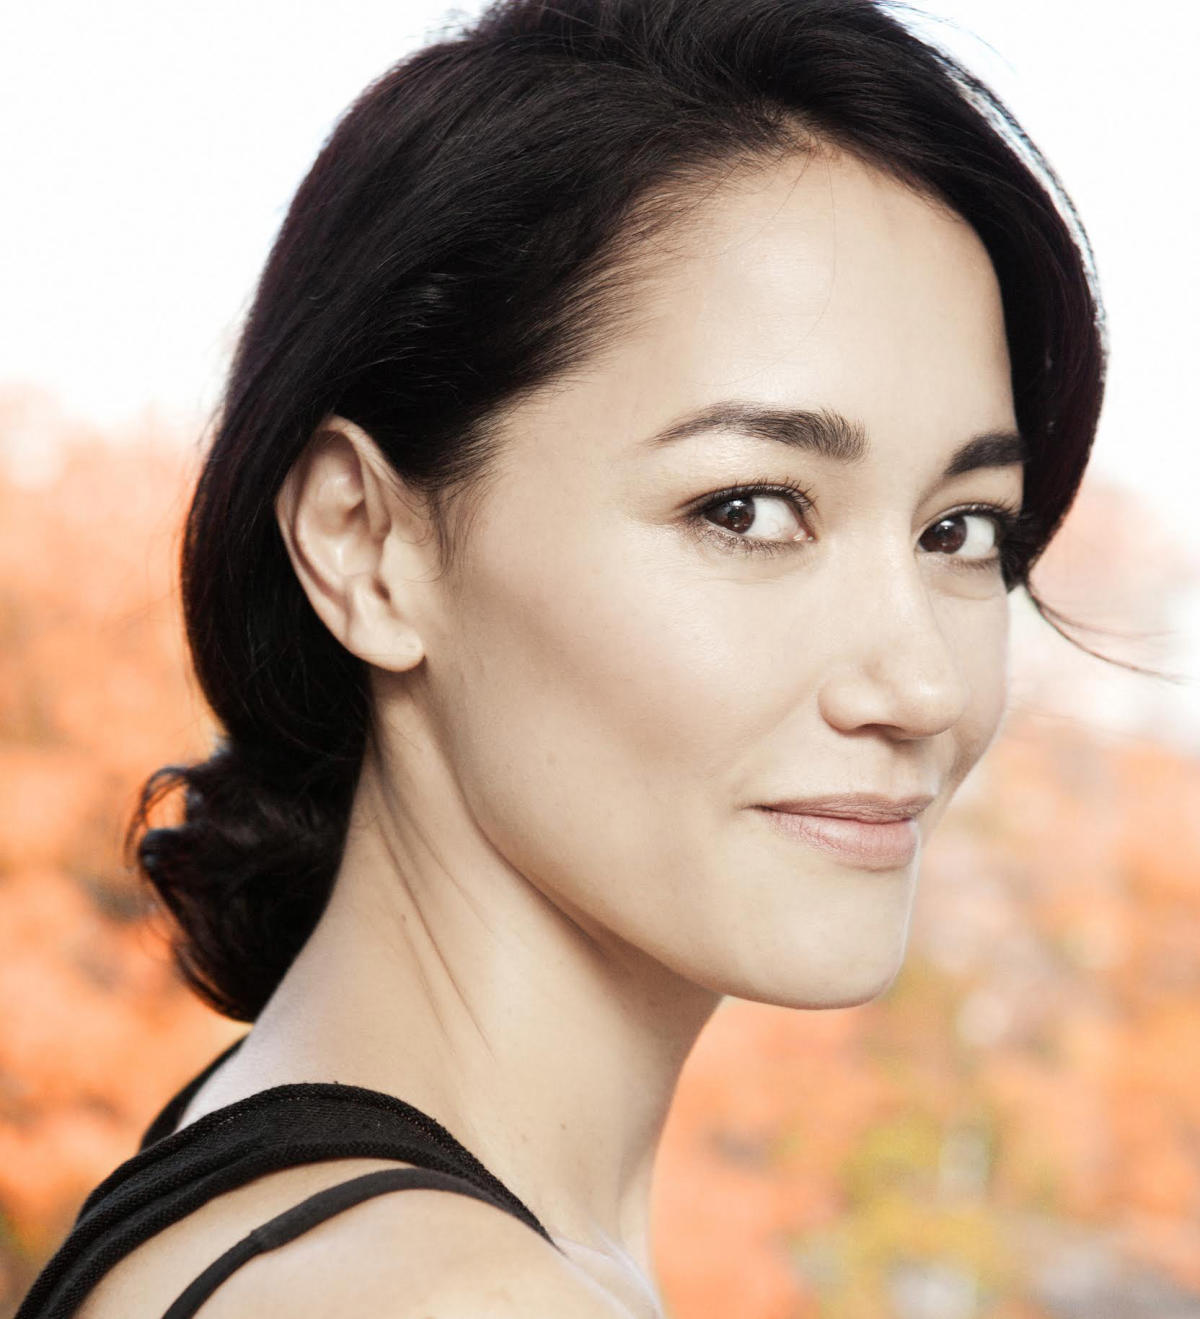 Mr. Robot Adds Sandrine Holt, Americans Actor and More for Season 2